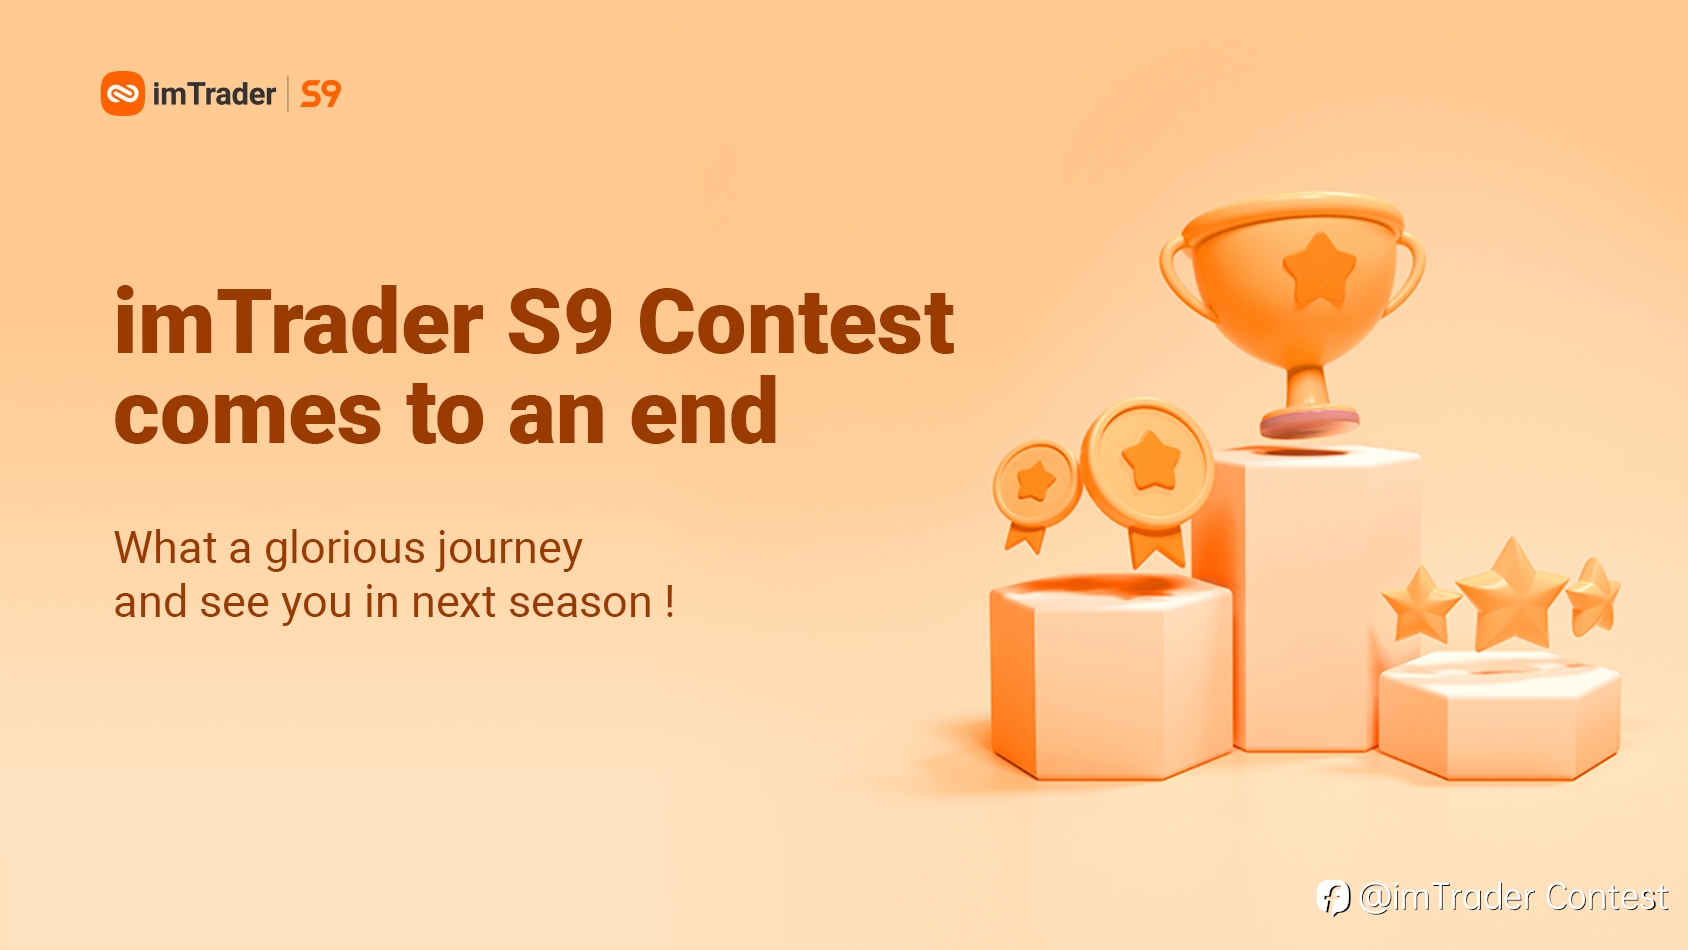 imTrader S9 Contest comes to an end - What a glorious journey!